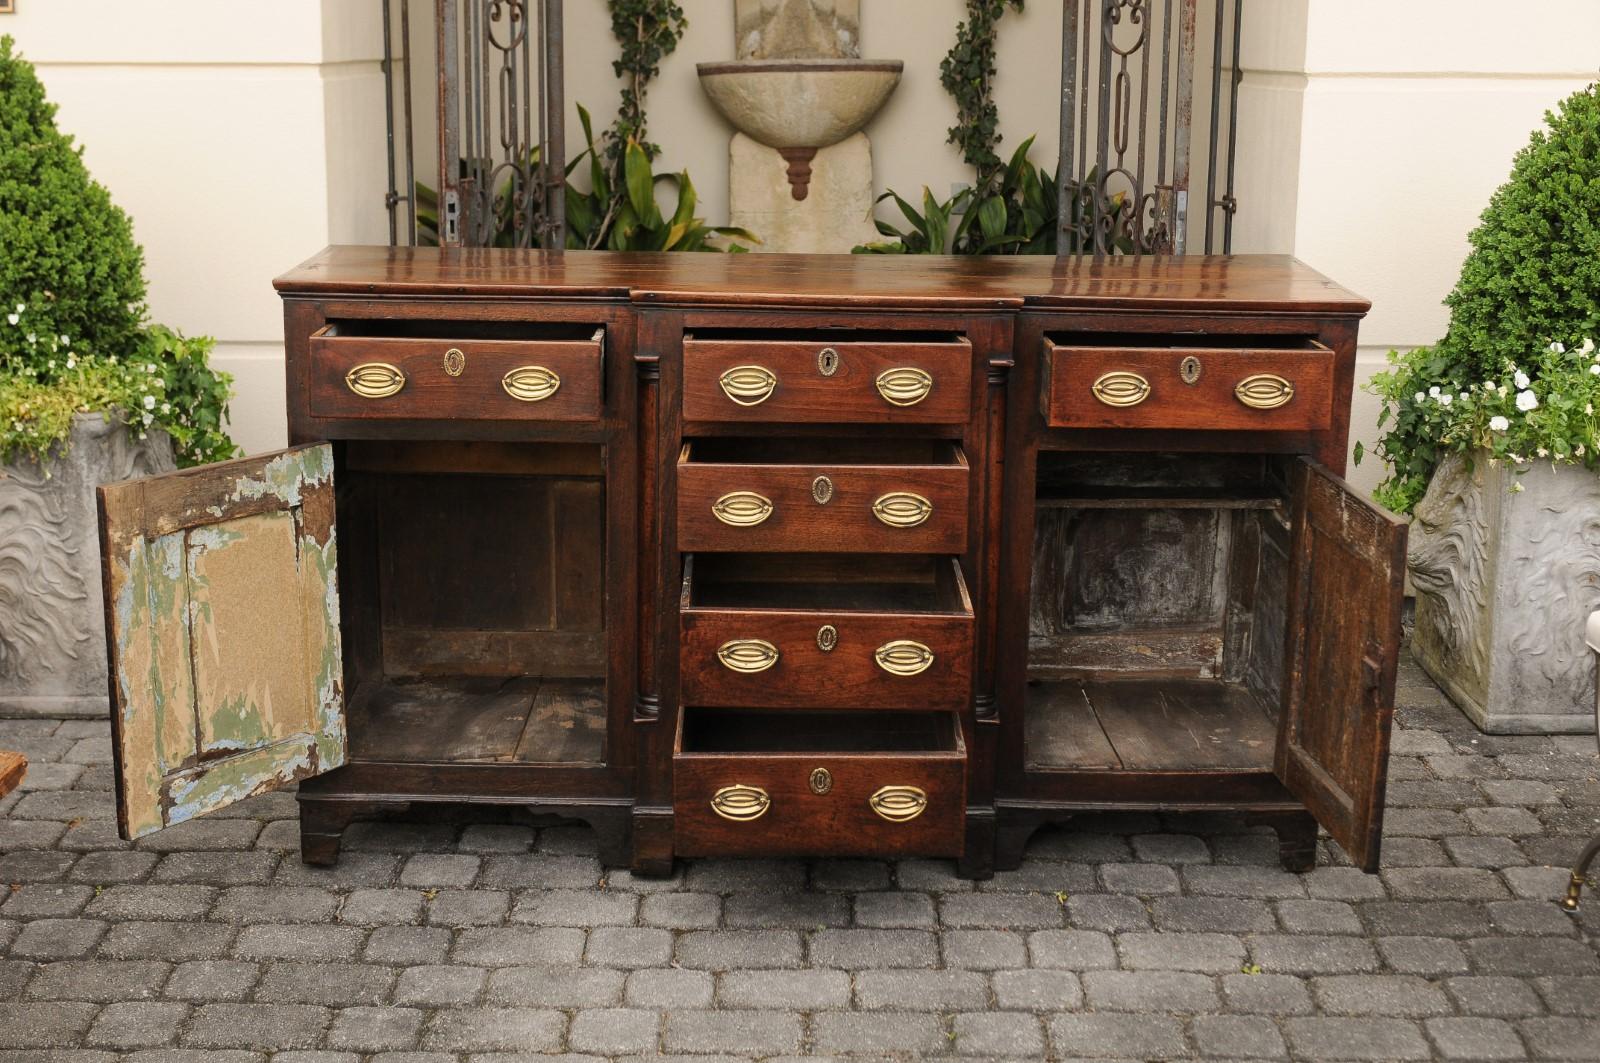 19th Century English 1800s George III Oak Dresser Base with Doors, Drawers and Semi-Columns